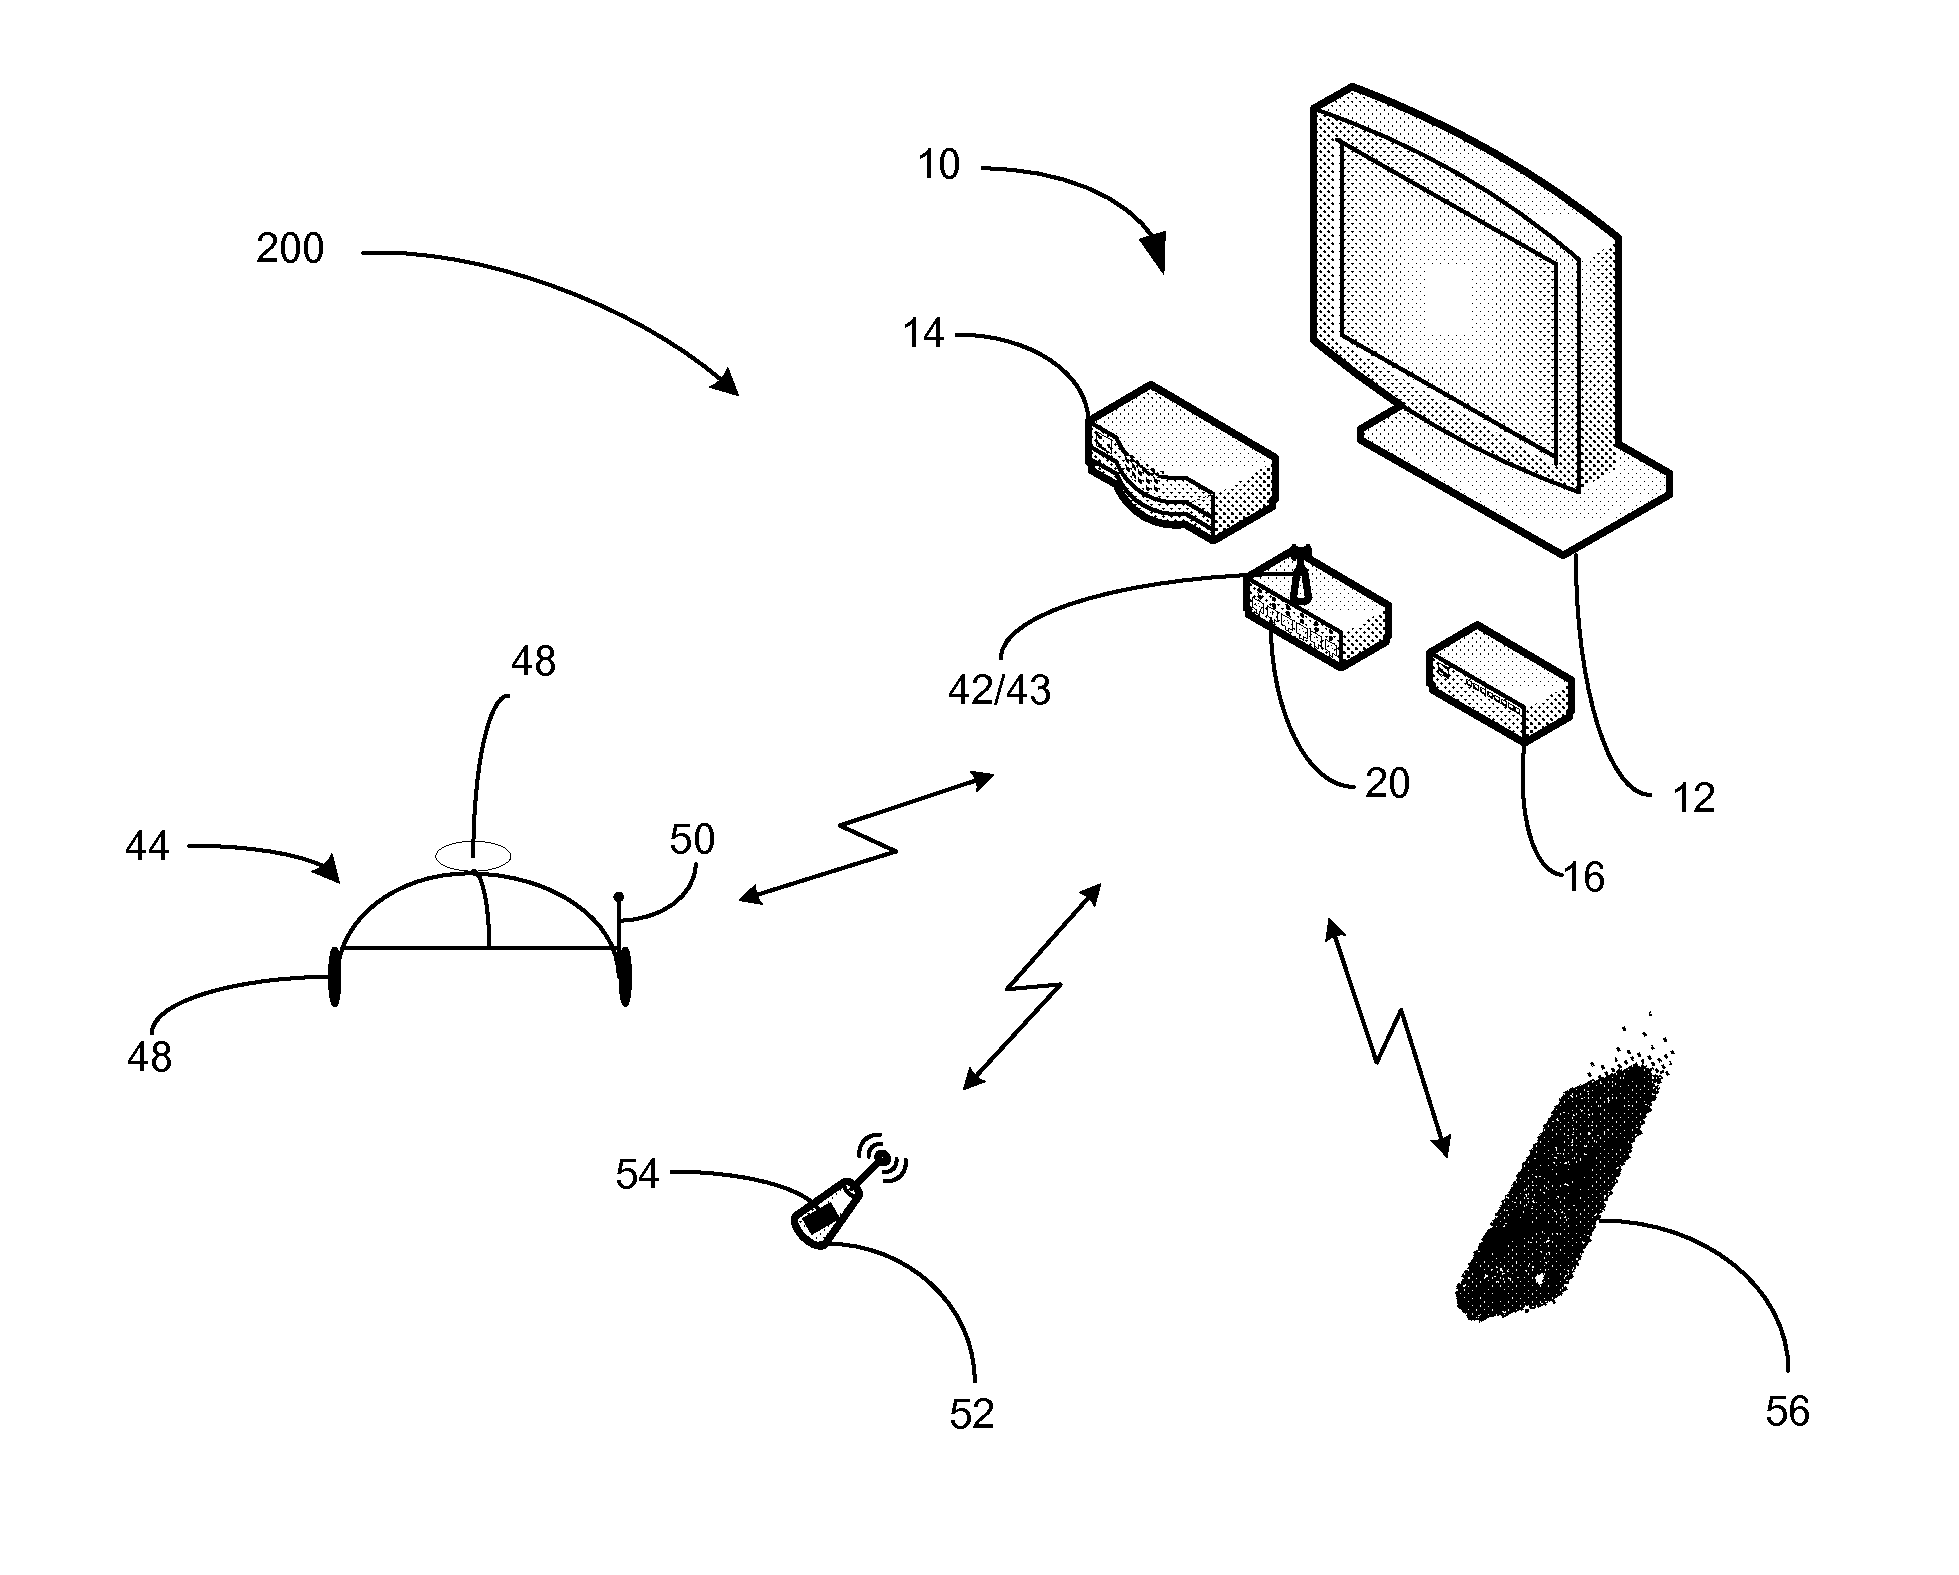 System and method for dynamic content modification based on user reactions